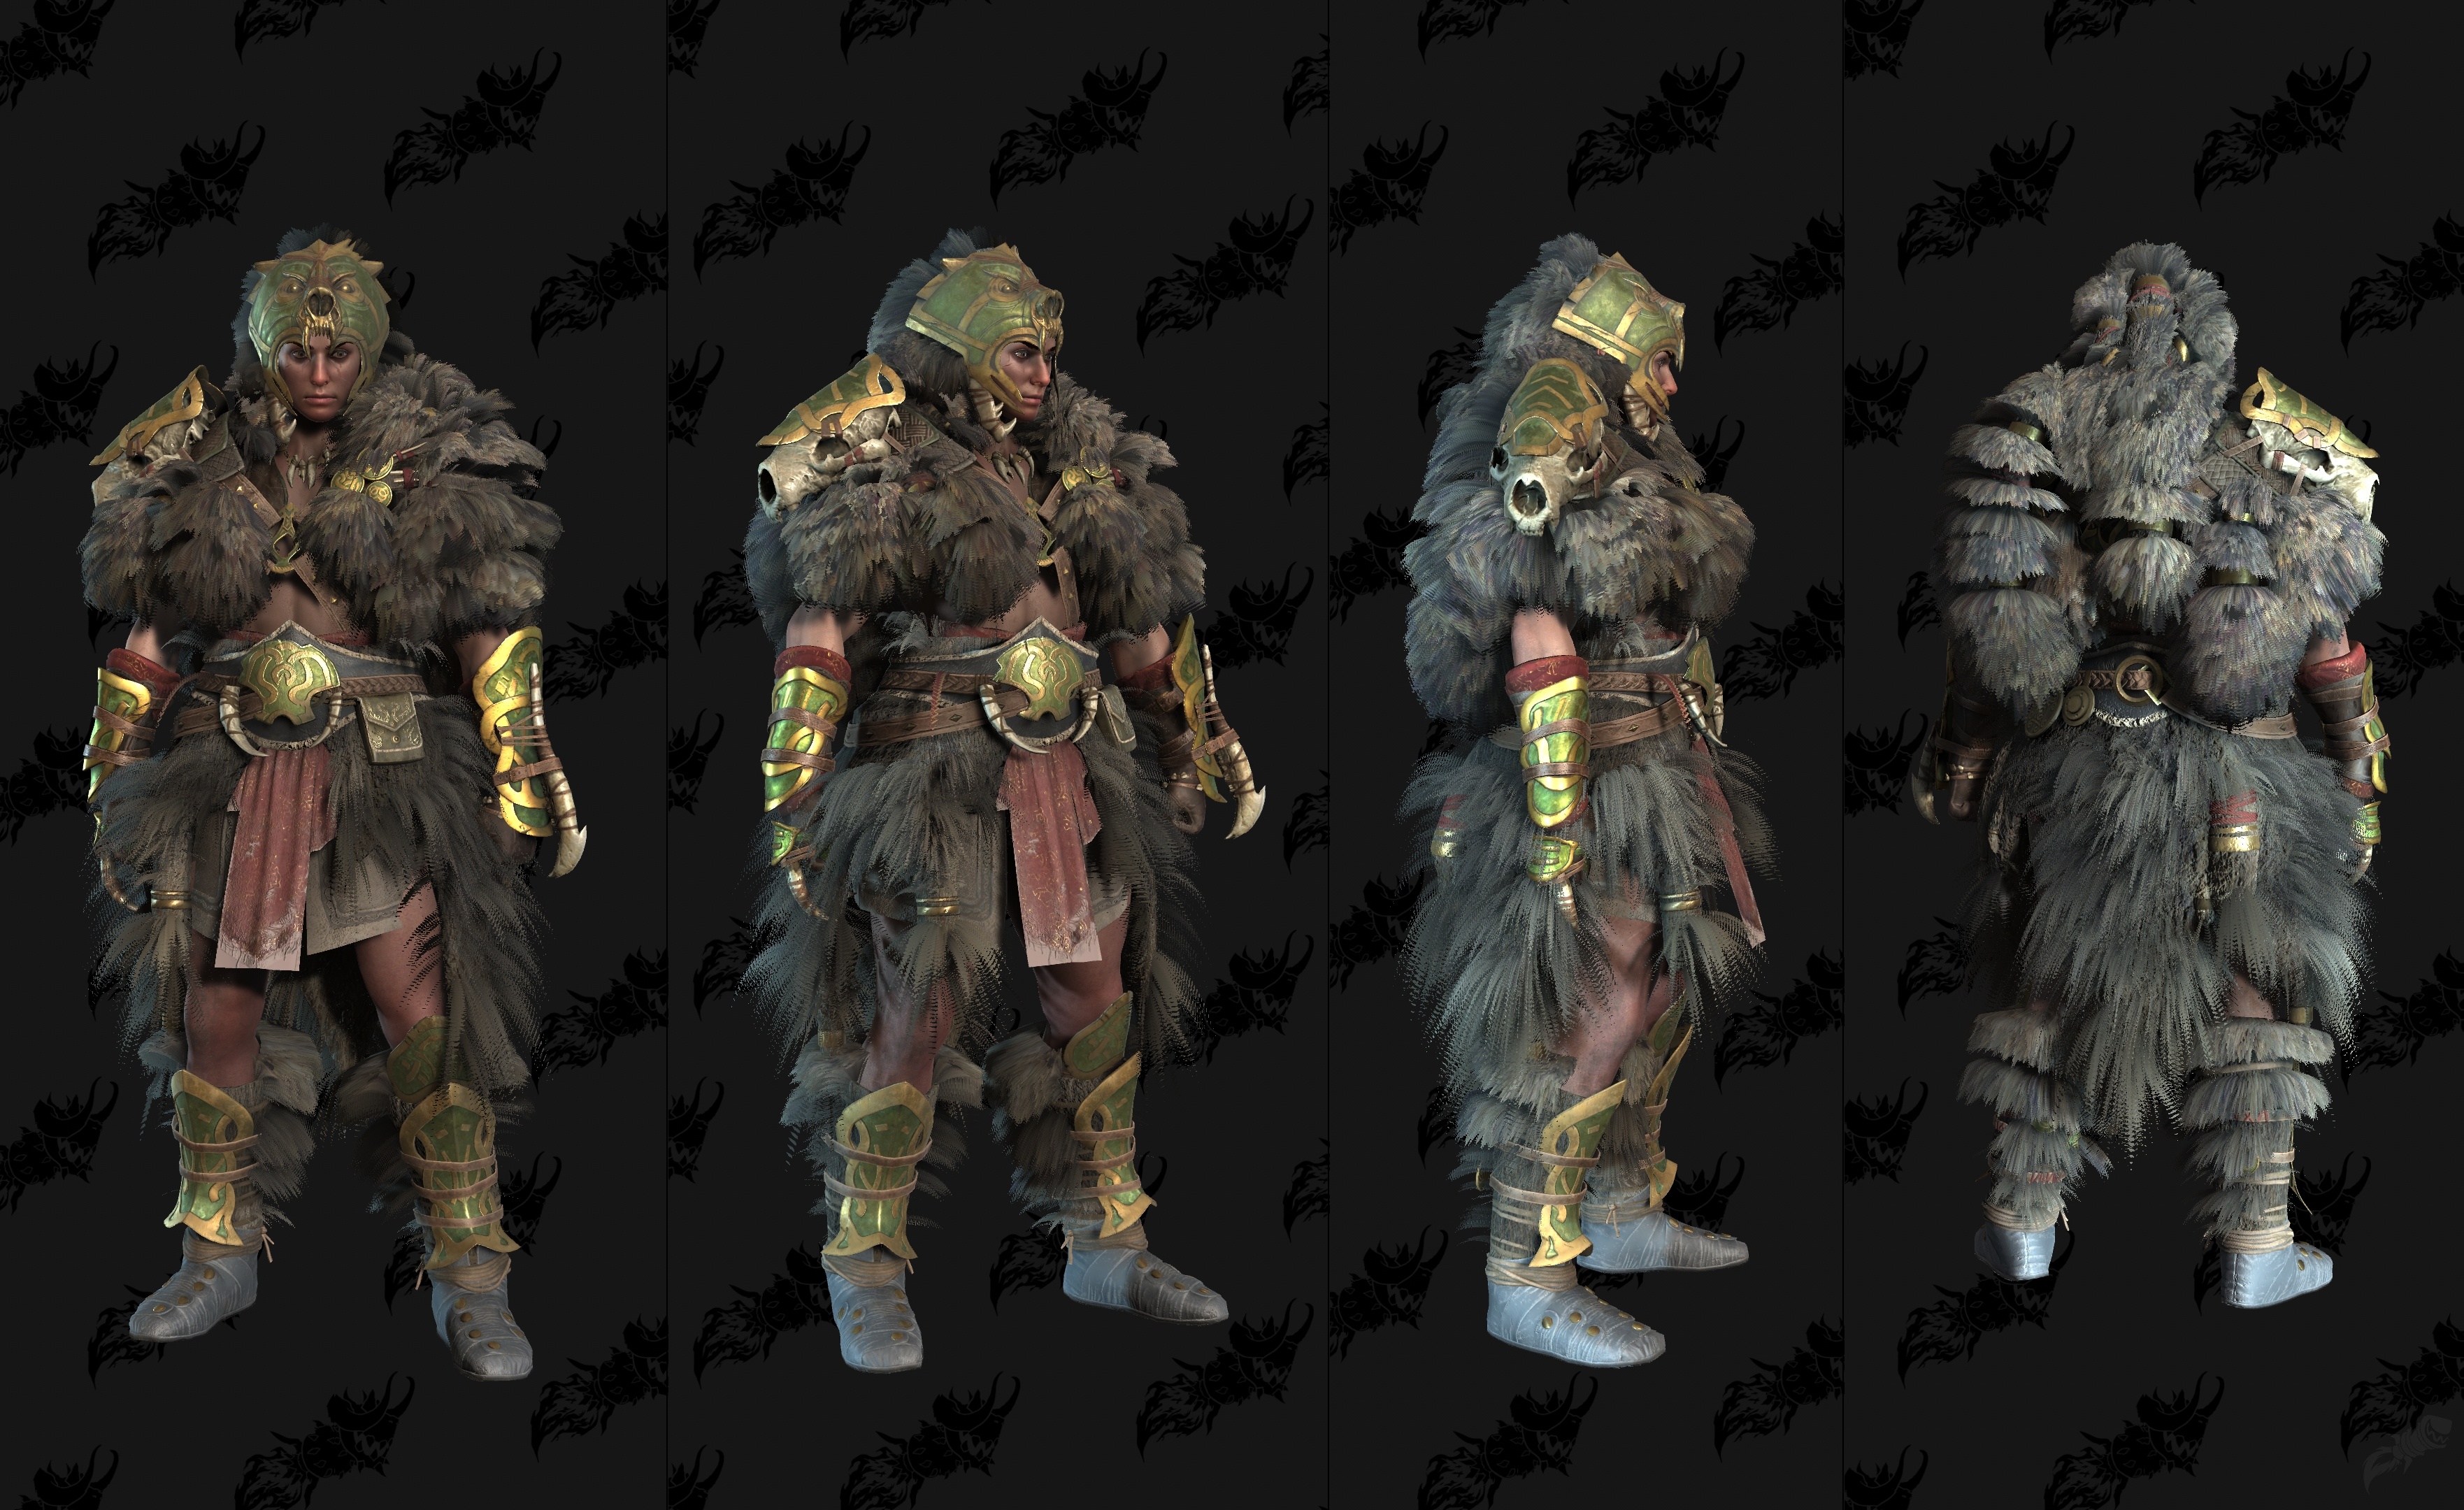 More Diablo 4 Cosmetic Sets On Sale - Up to 50% off Select Sets - Wowhead  News